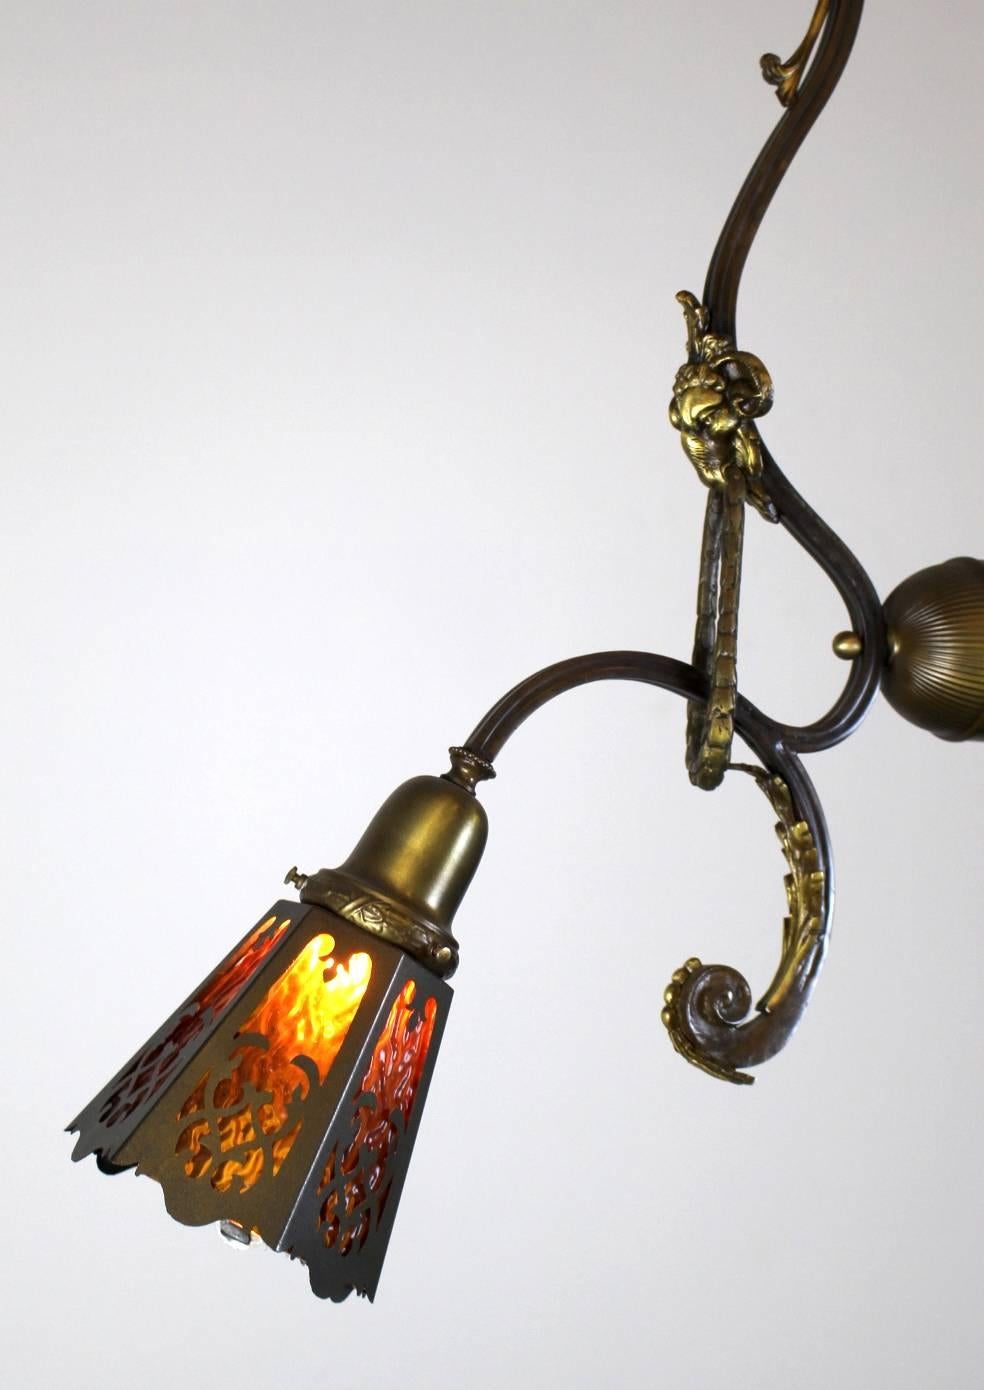 Unusual French Beaux-Arts style Fixture.

Two lights, fitted with cut-out shades with amber glass.

Great styling; includes ram's head details on each arm, holding suspended wreaths in their mouths.

Dainty leaves add shape to the expressively